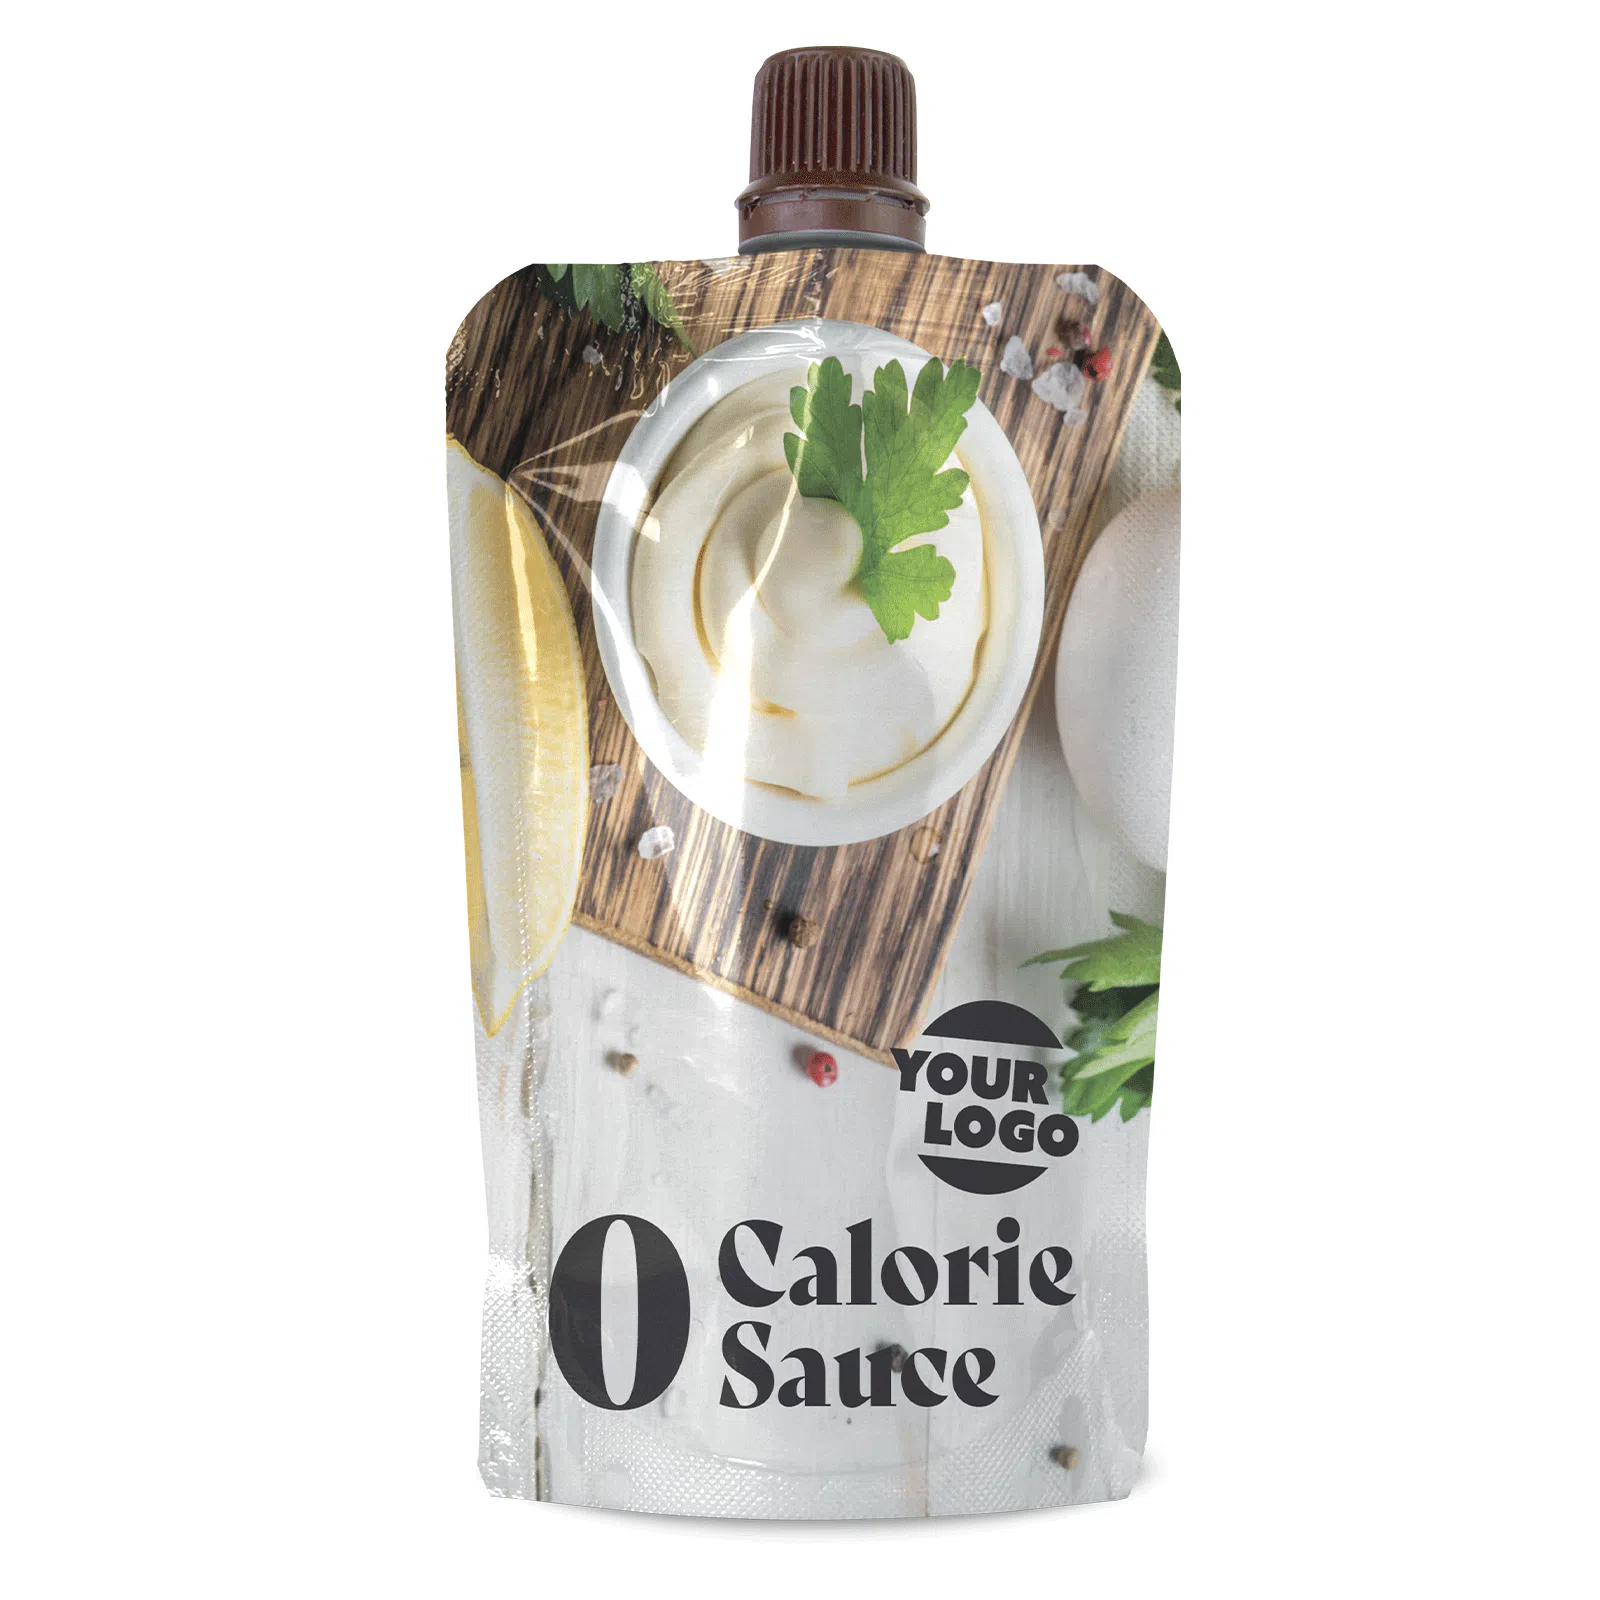 Private Label amerpharma 0 calorie sauces in fully printed pouch with spout 50 g